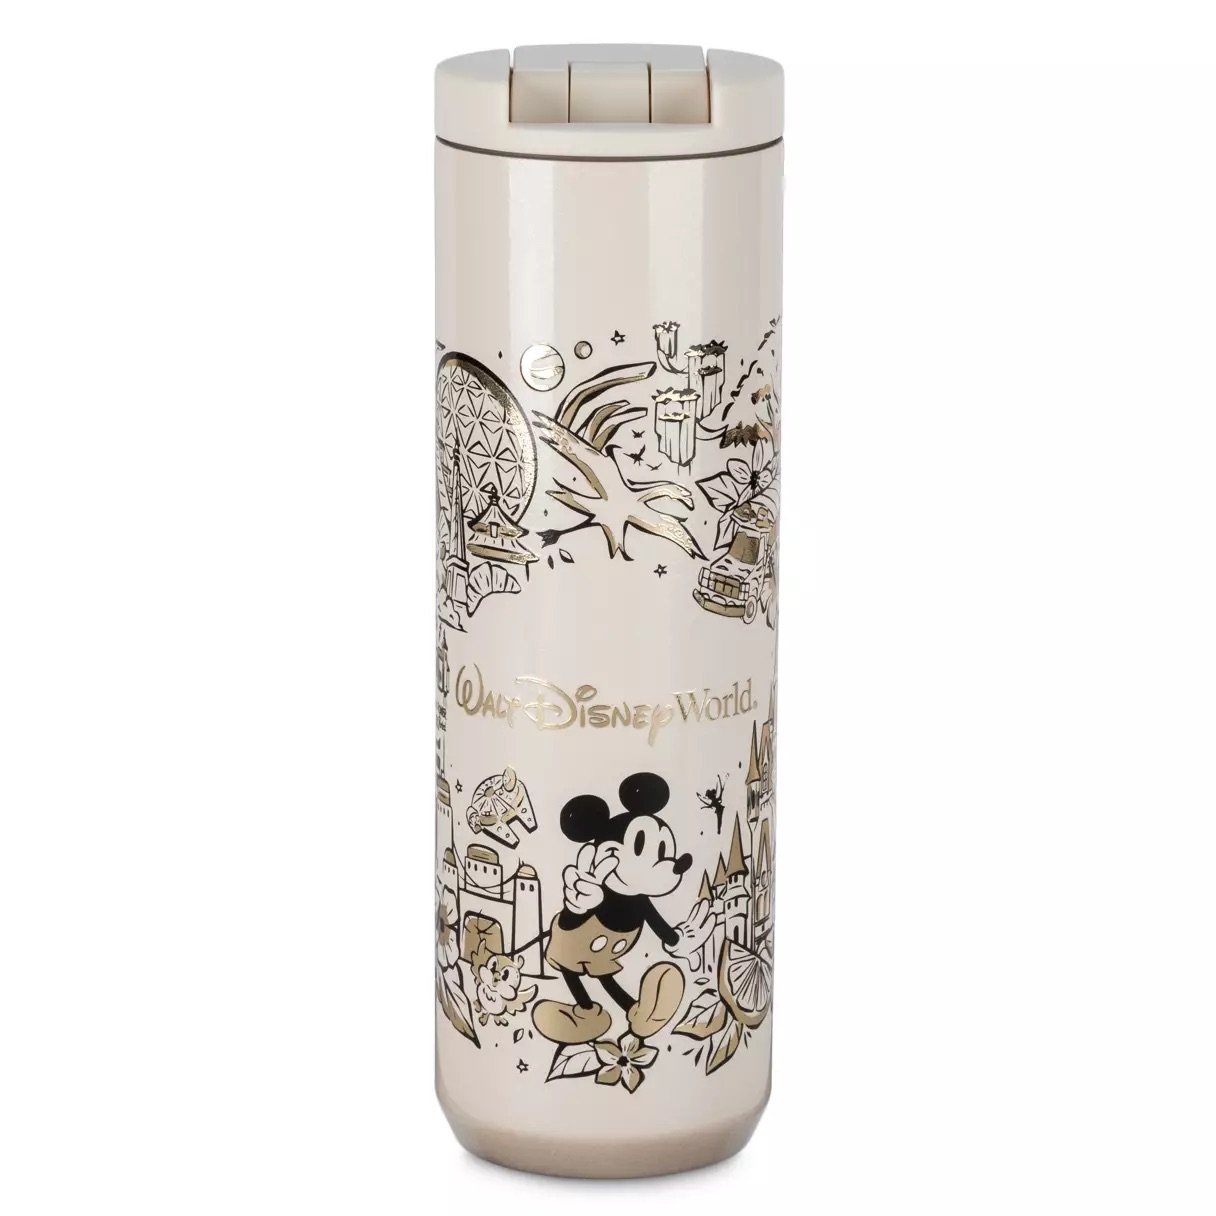 FULL List of Disney Starbucks Cups You Can Buy Online RIGHT NOW!